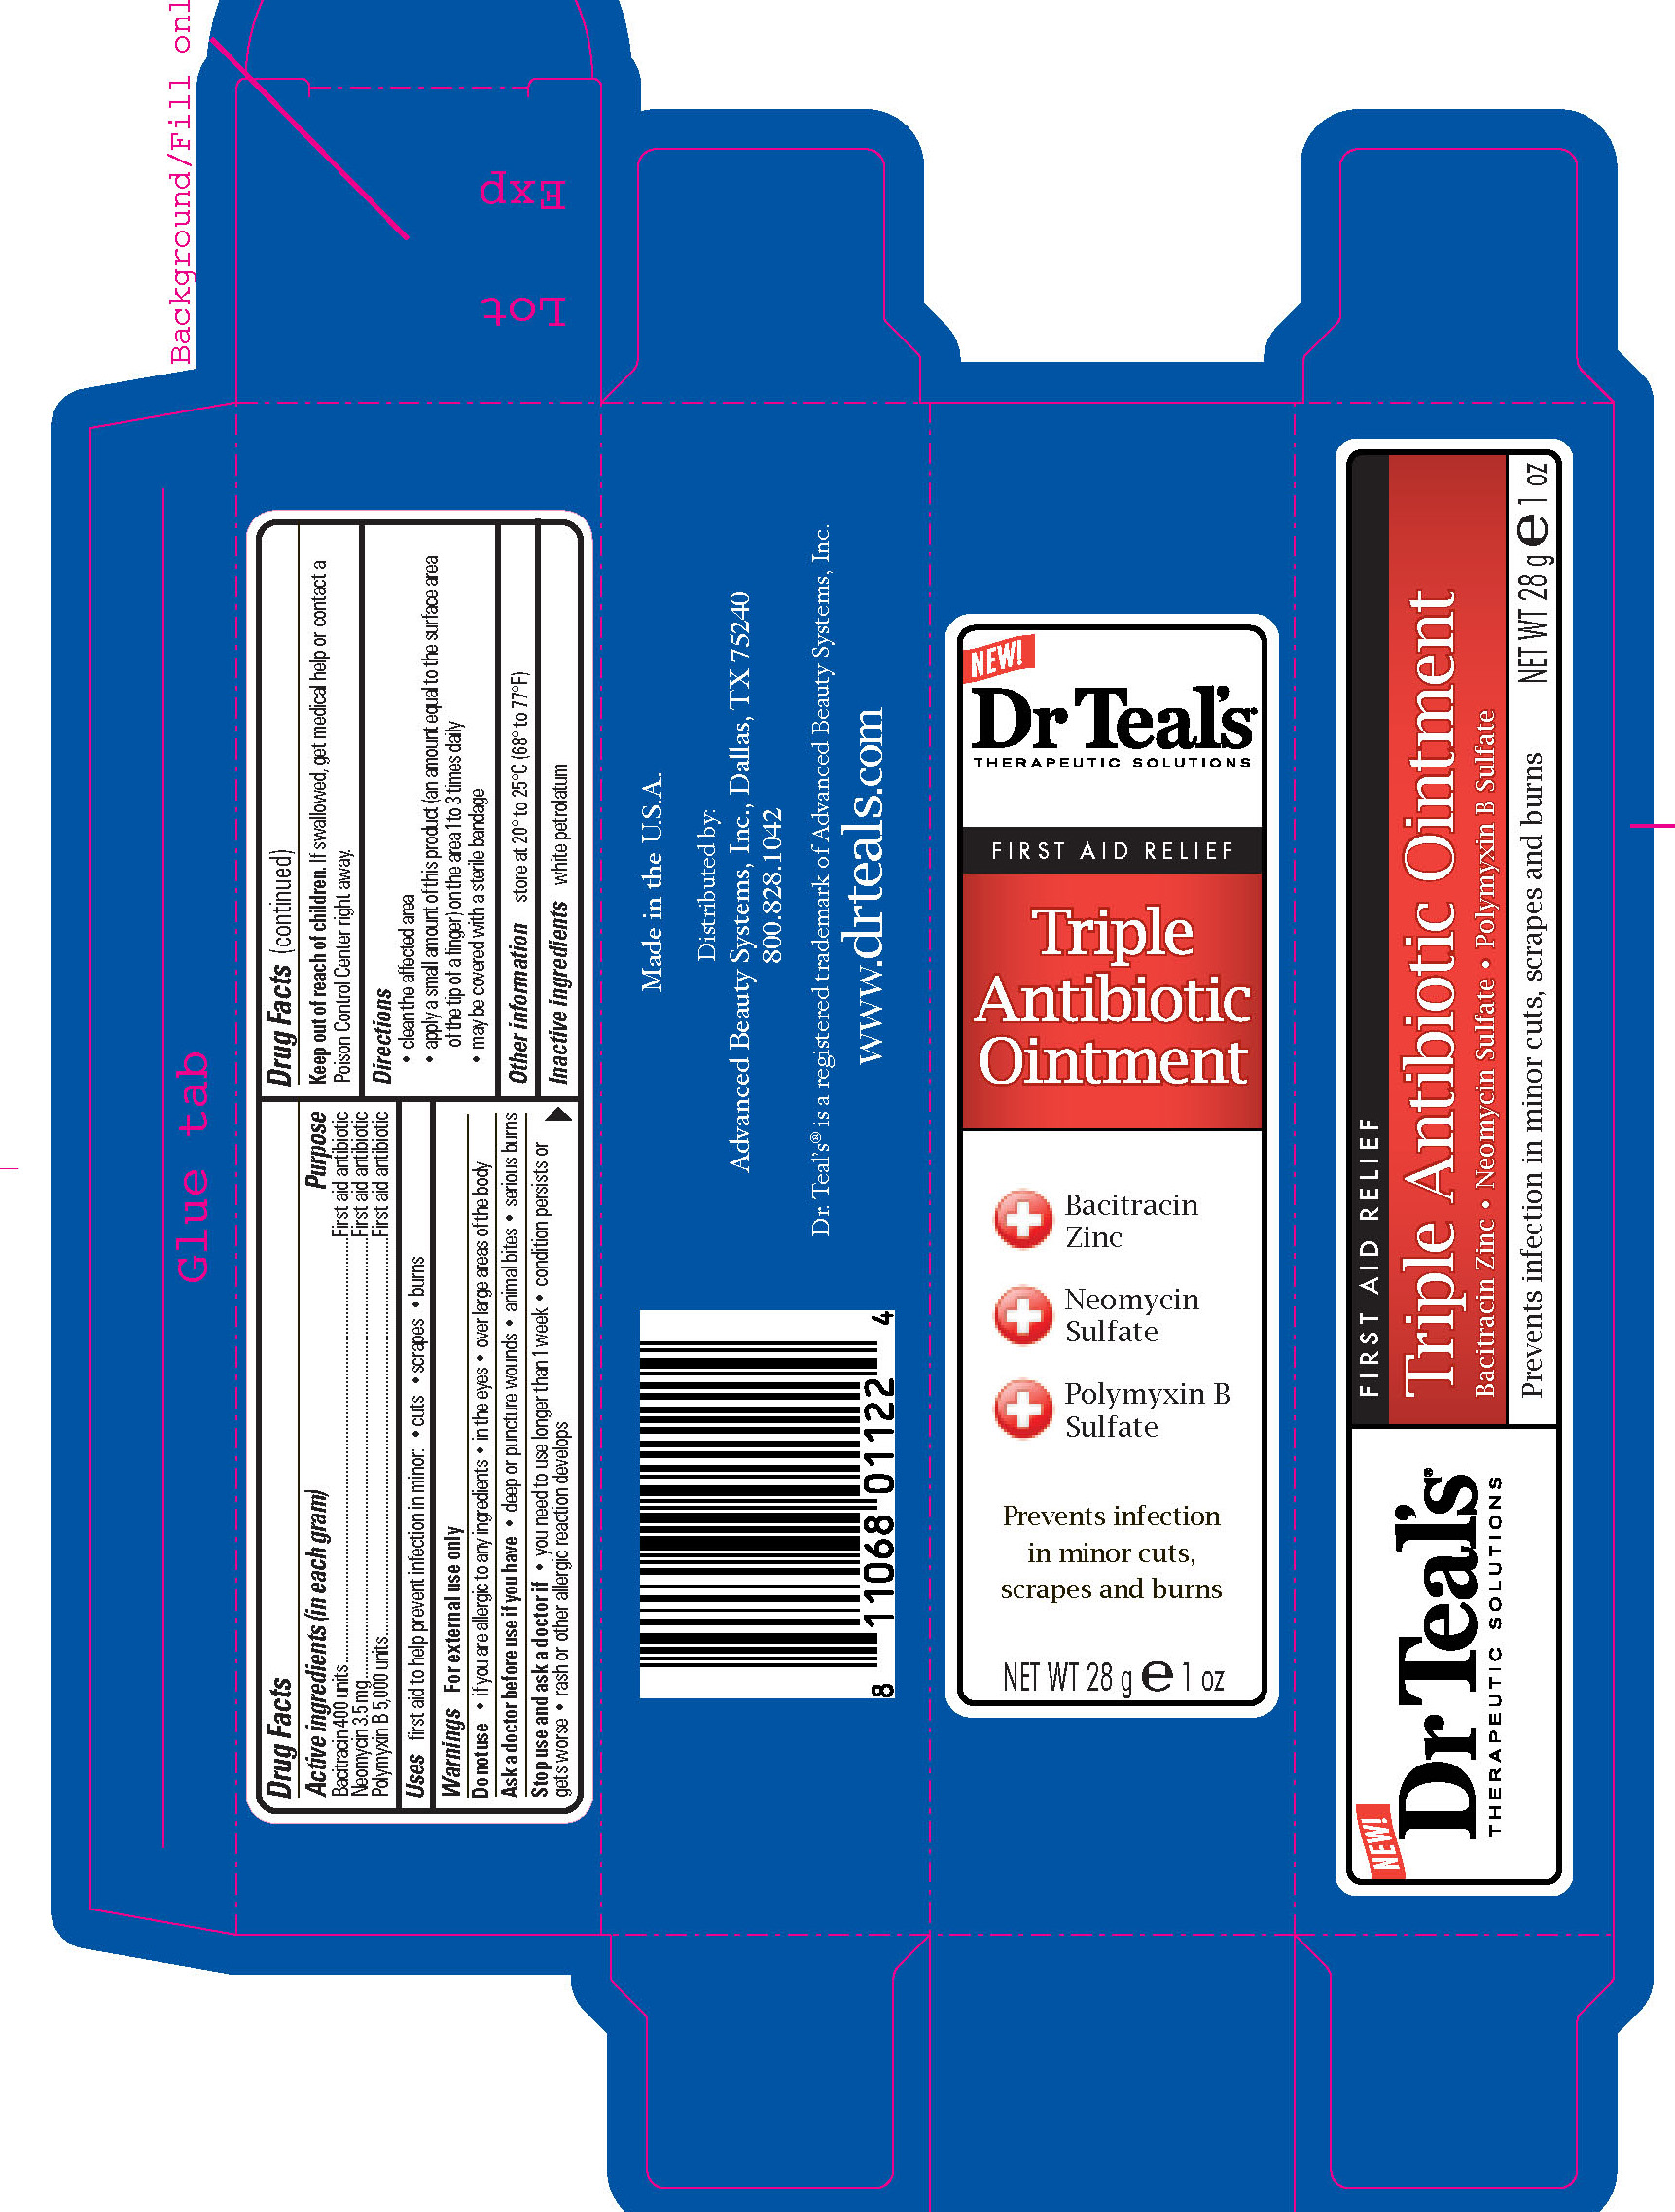 Dr Teals Triple Antibiotic (Bactracin, Neomycin, Polymyxin B) Ointment [Advanced Beauty Systems, Inc.]